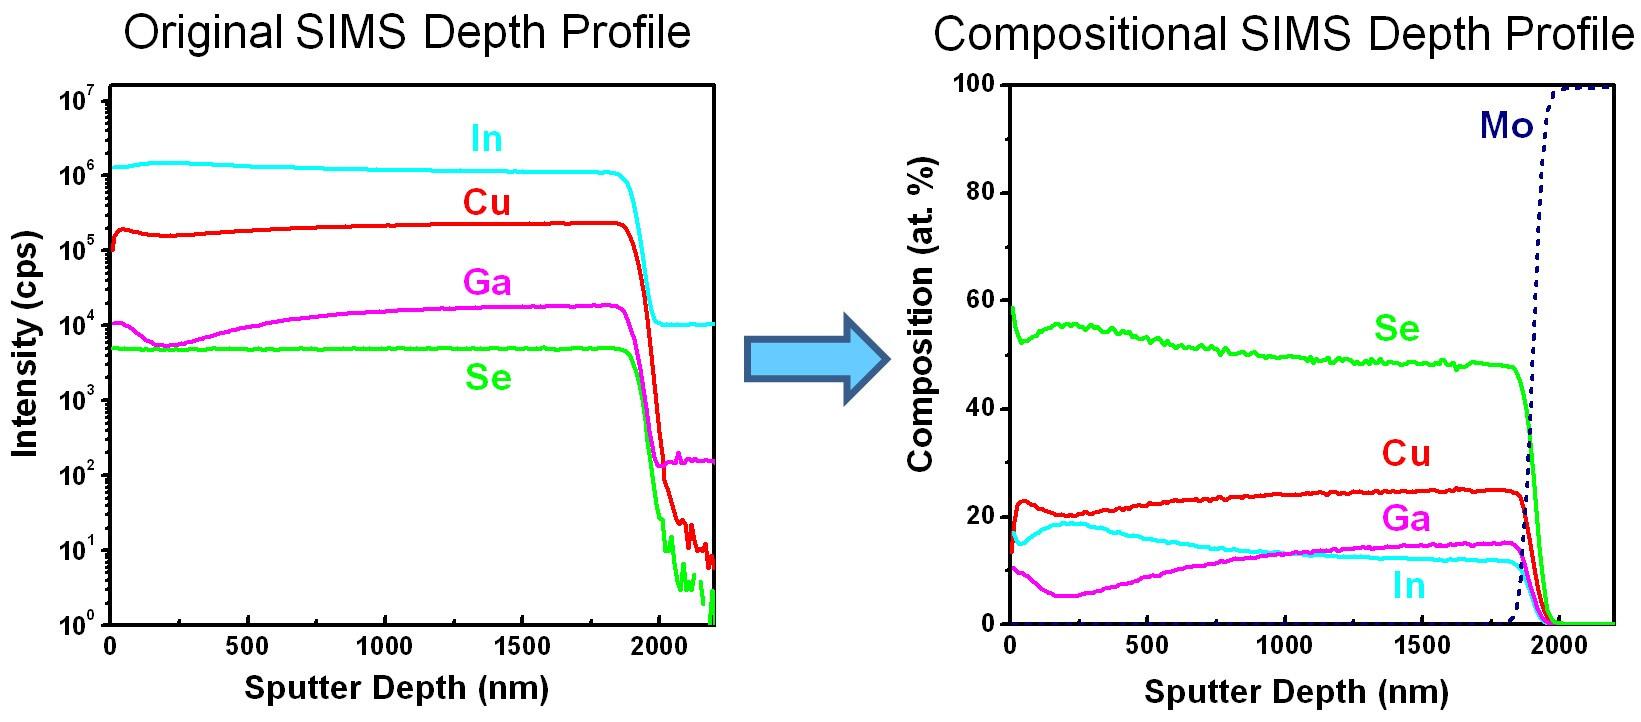 conversion of an original SIMS depth profile of a CIGS thin film to a compositional depth profile